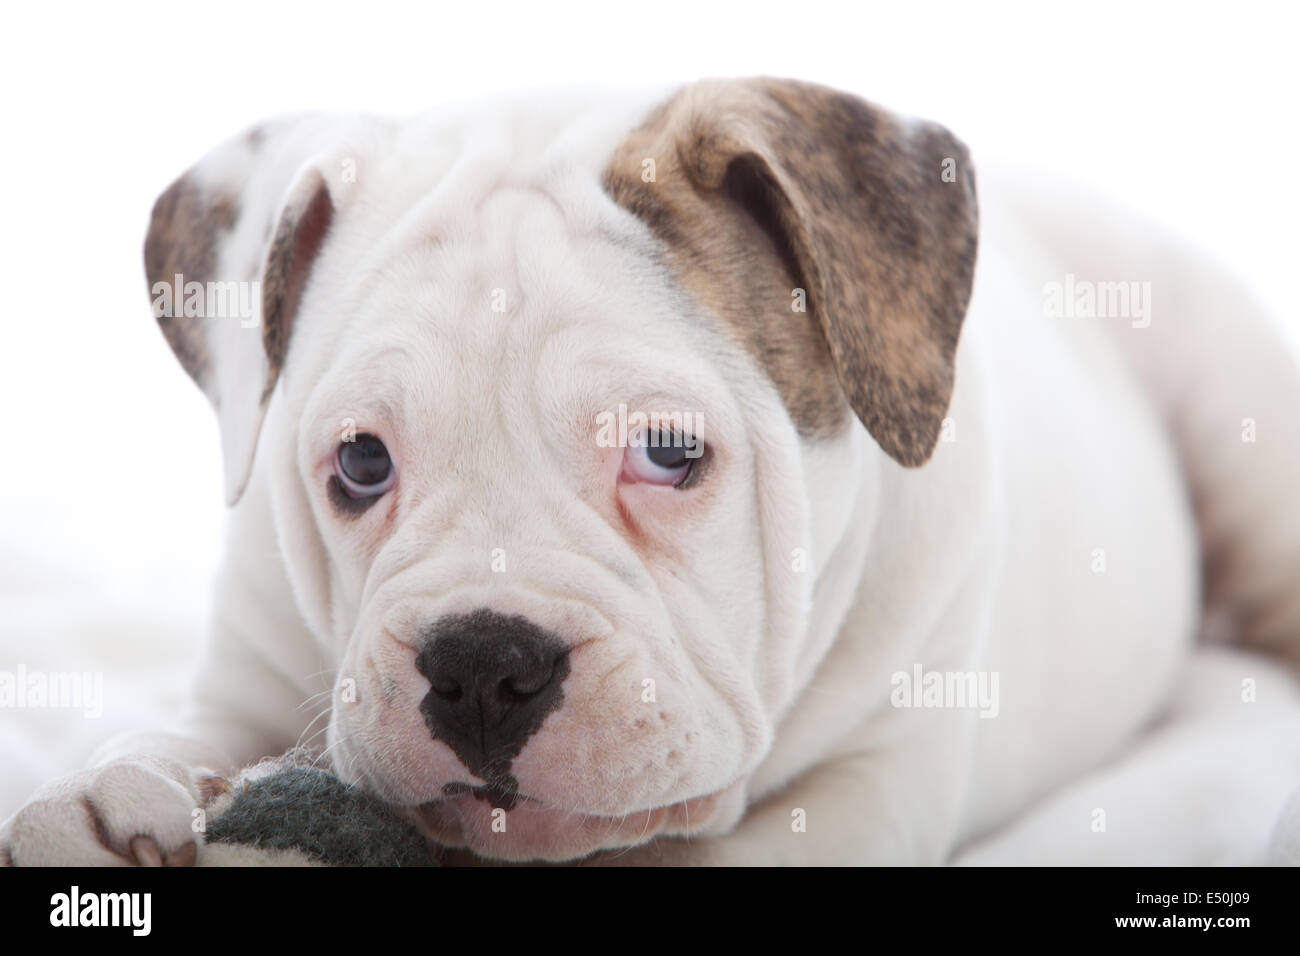 Cute young dog with sad droopy eyes Stock Photo